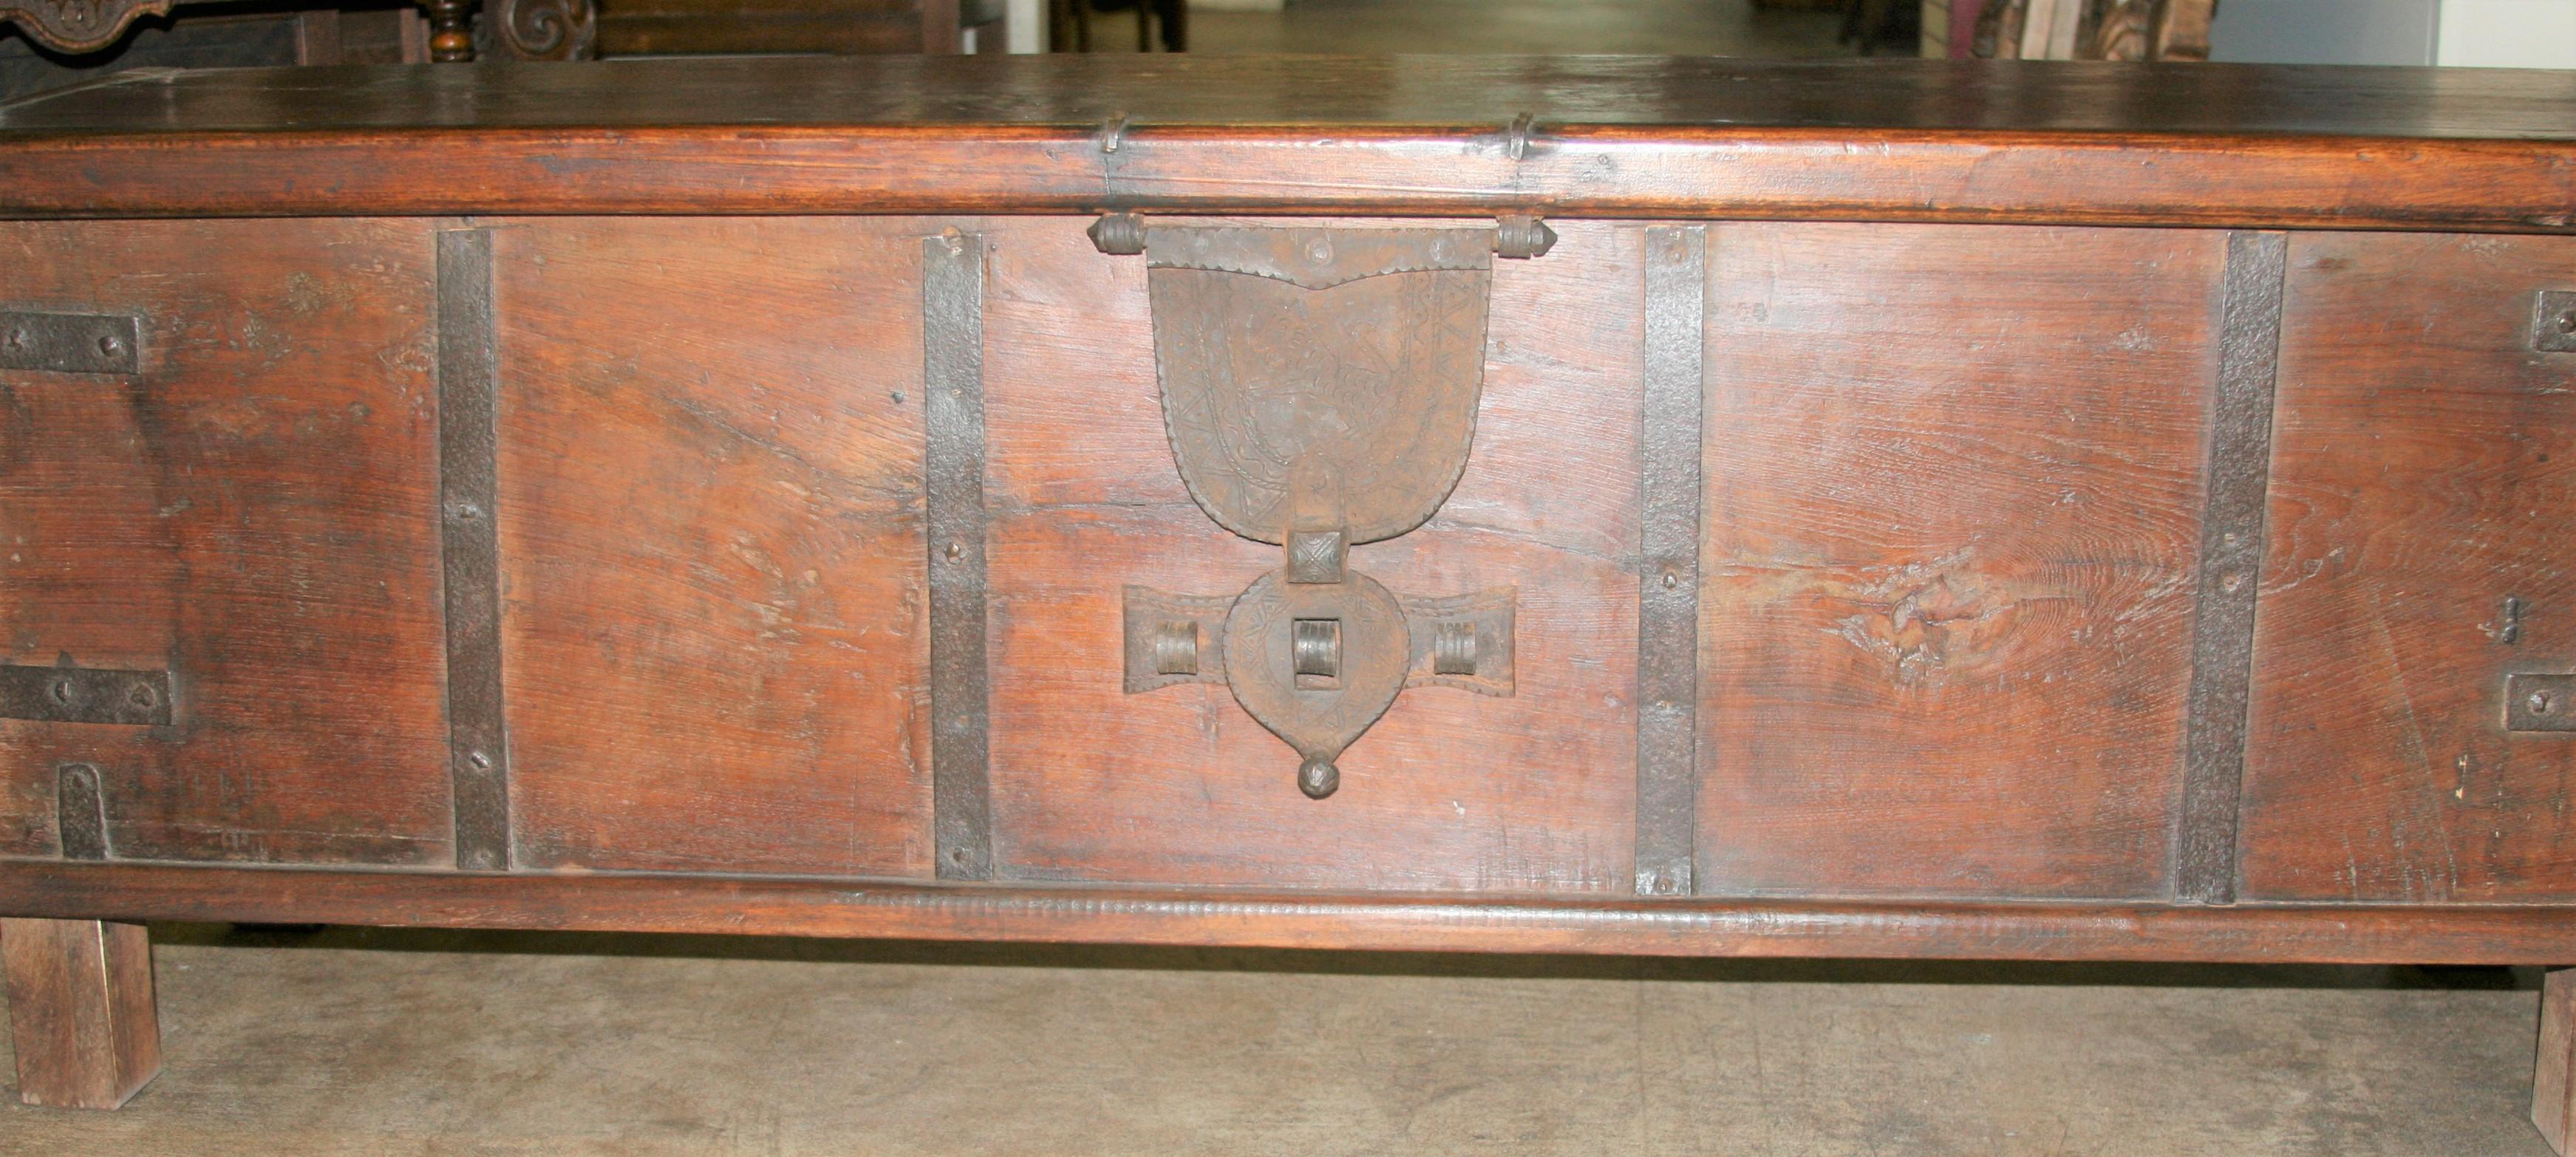 Hand-Crafted 19th Century Solid Teak Wood Dowry Chest Modified as Storage Bench for Bed For Sale